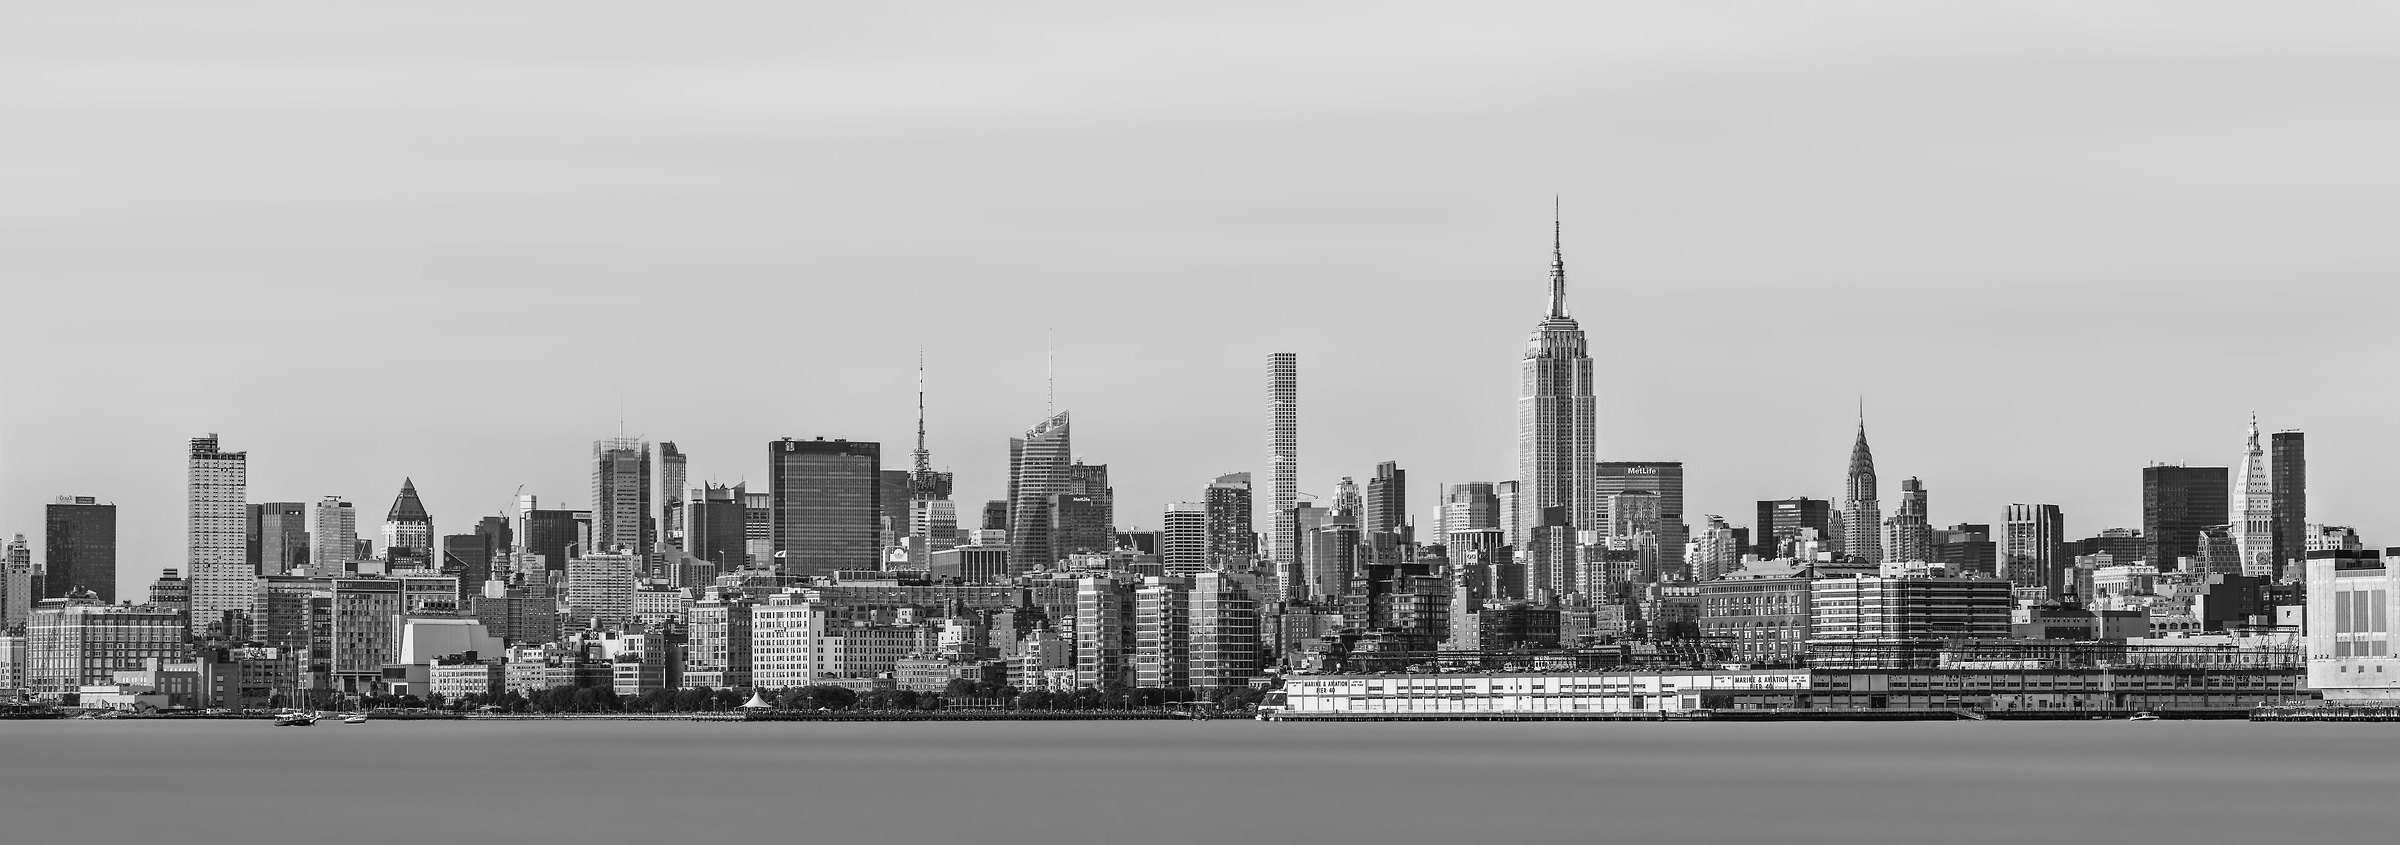 512 megapixels! A very high defintion long exposure cityscape VAST photo of the Midtown Manhattan New York City skyline and the Hudson River in black and white; created by Dan Piech.